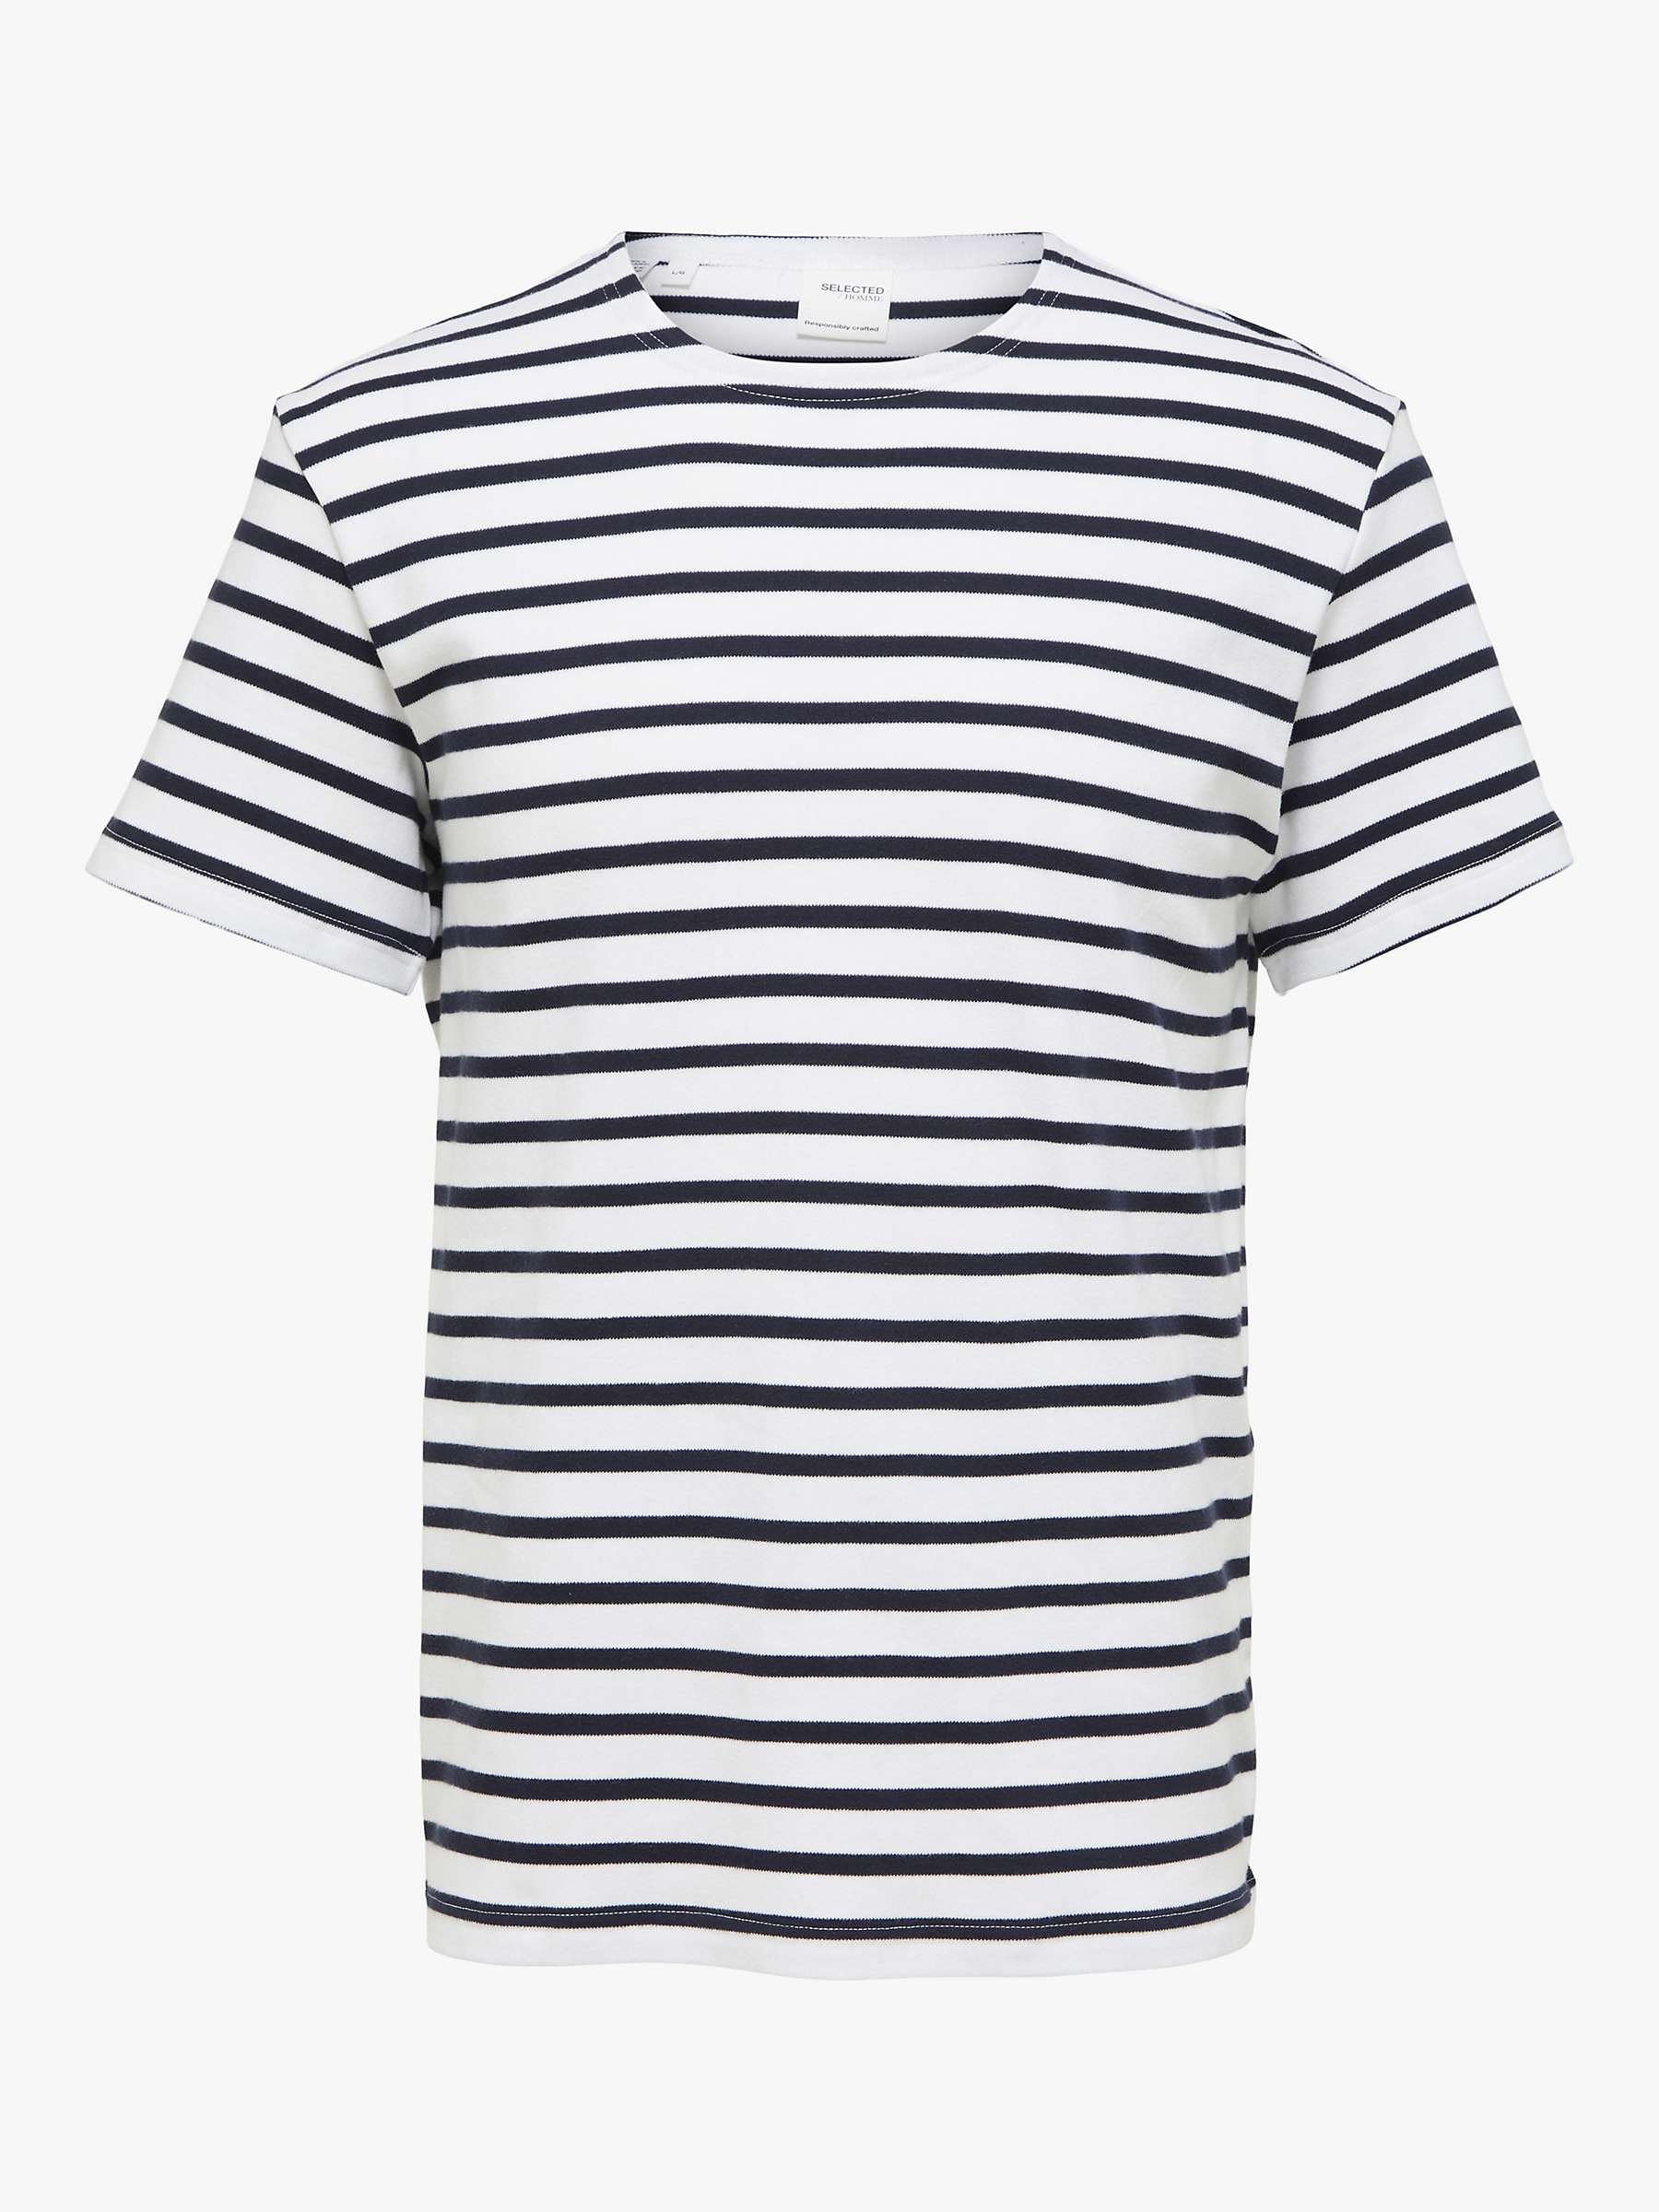 Buy SELECTED HOMME Stripe Organic Cotton T-Shirt Online at johnlewis.com